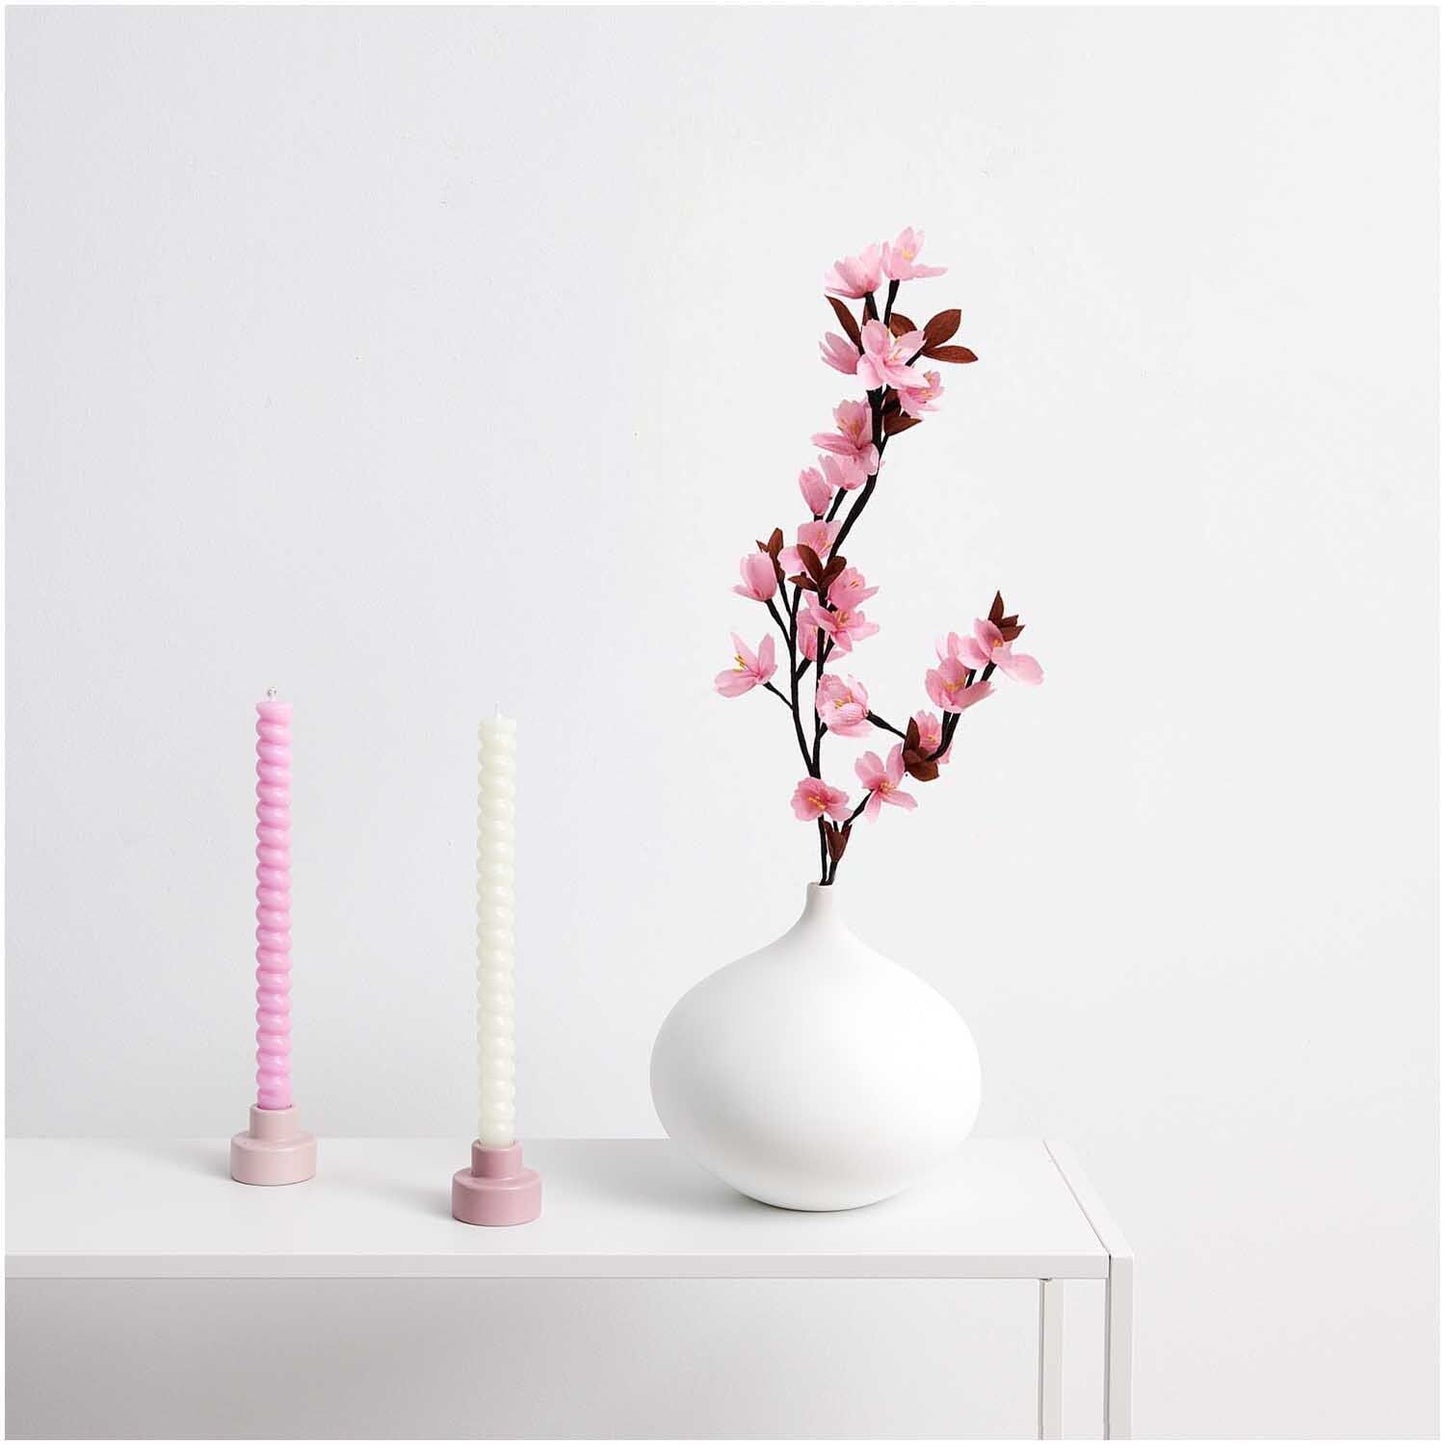 RICO Spiral Candle 28 cm in cherry blossom